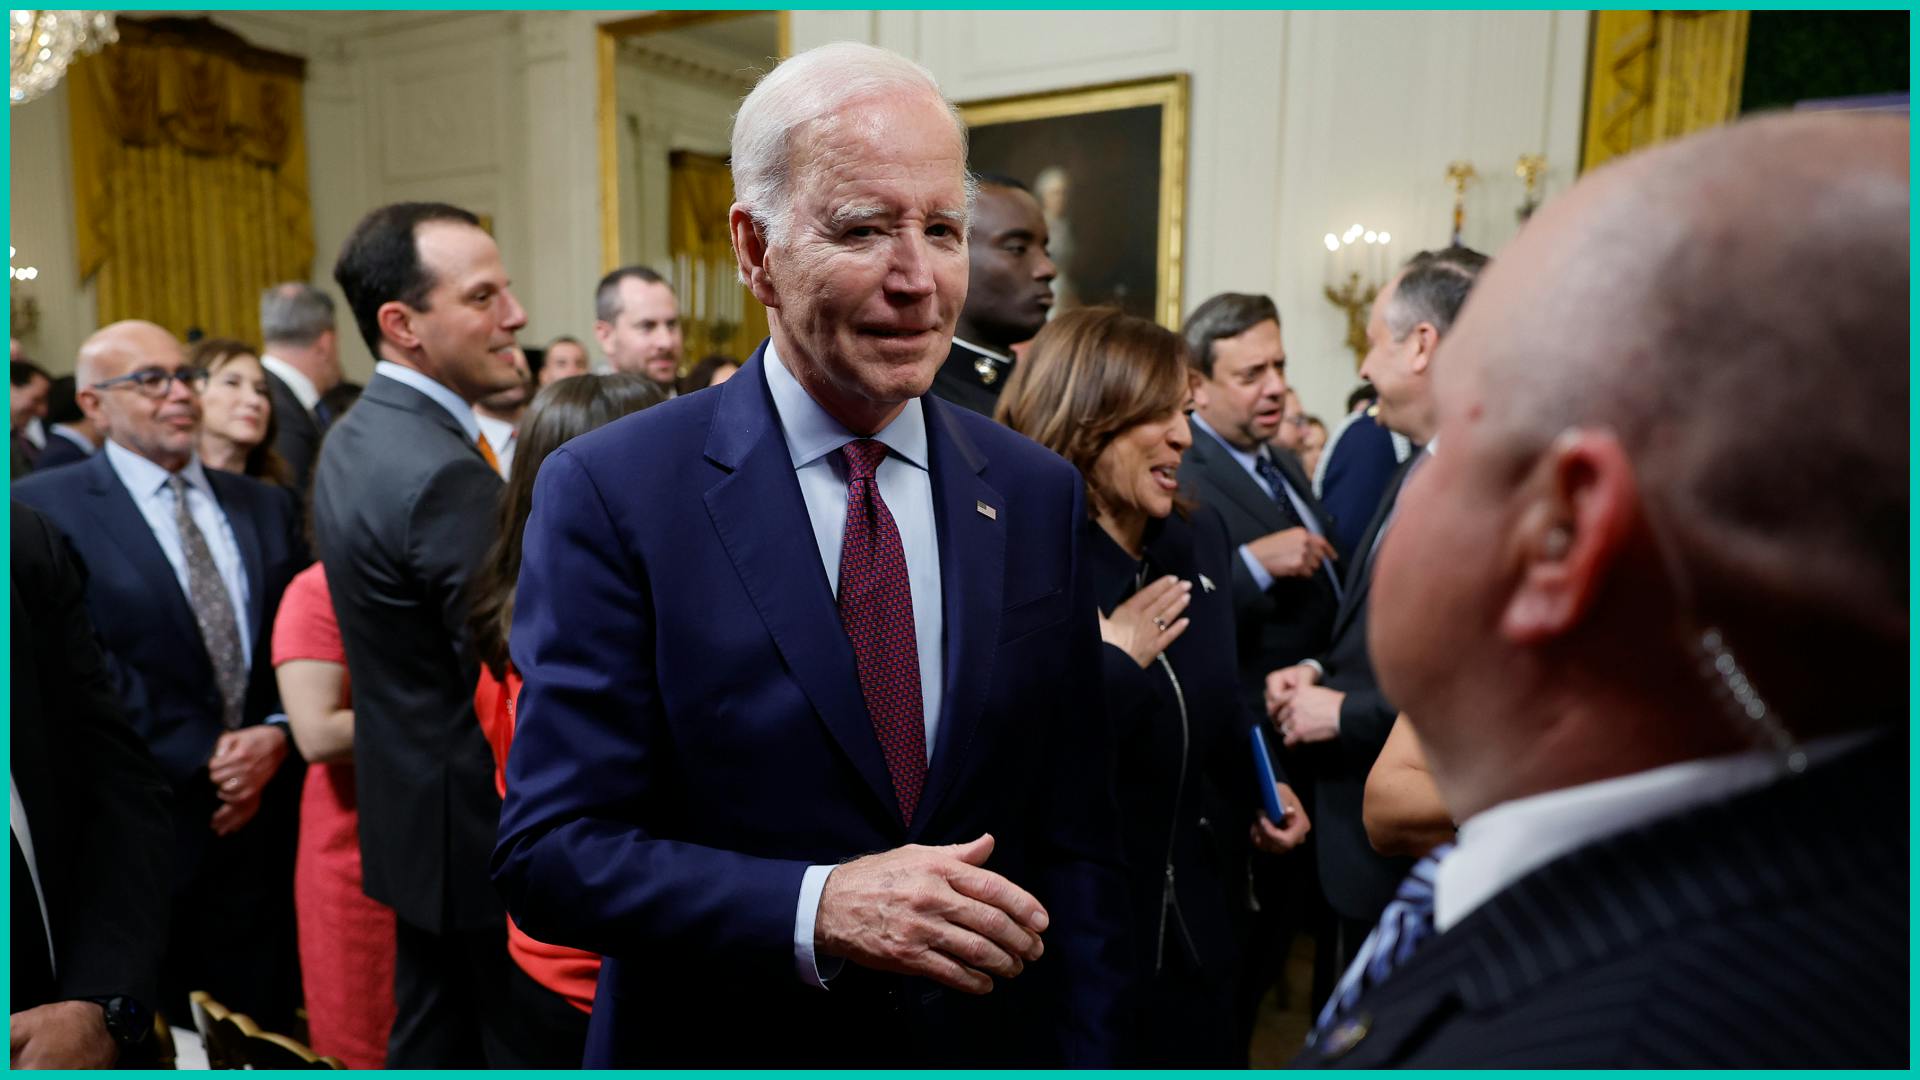 U.S. President Joe Biden departs a celebration marking Jewish American Heritage Month in the East Room of the White House on May 16, 2023 in Washington, DC